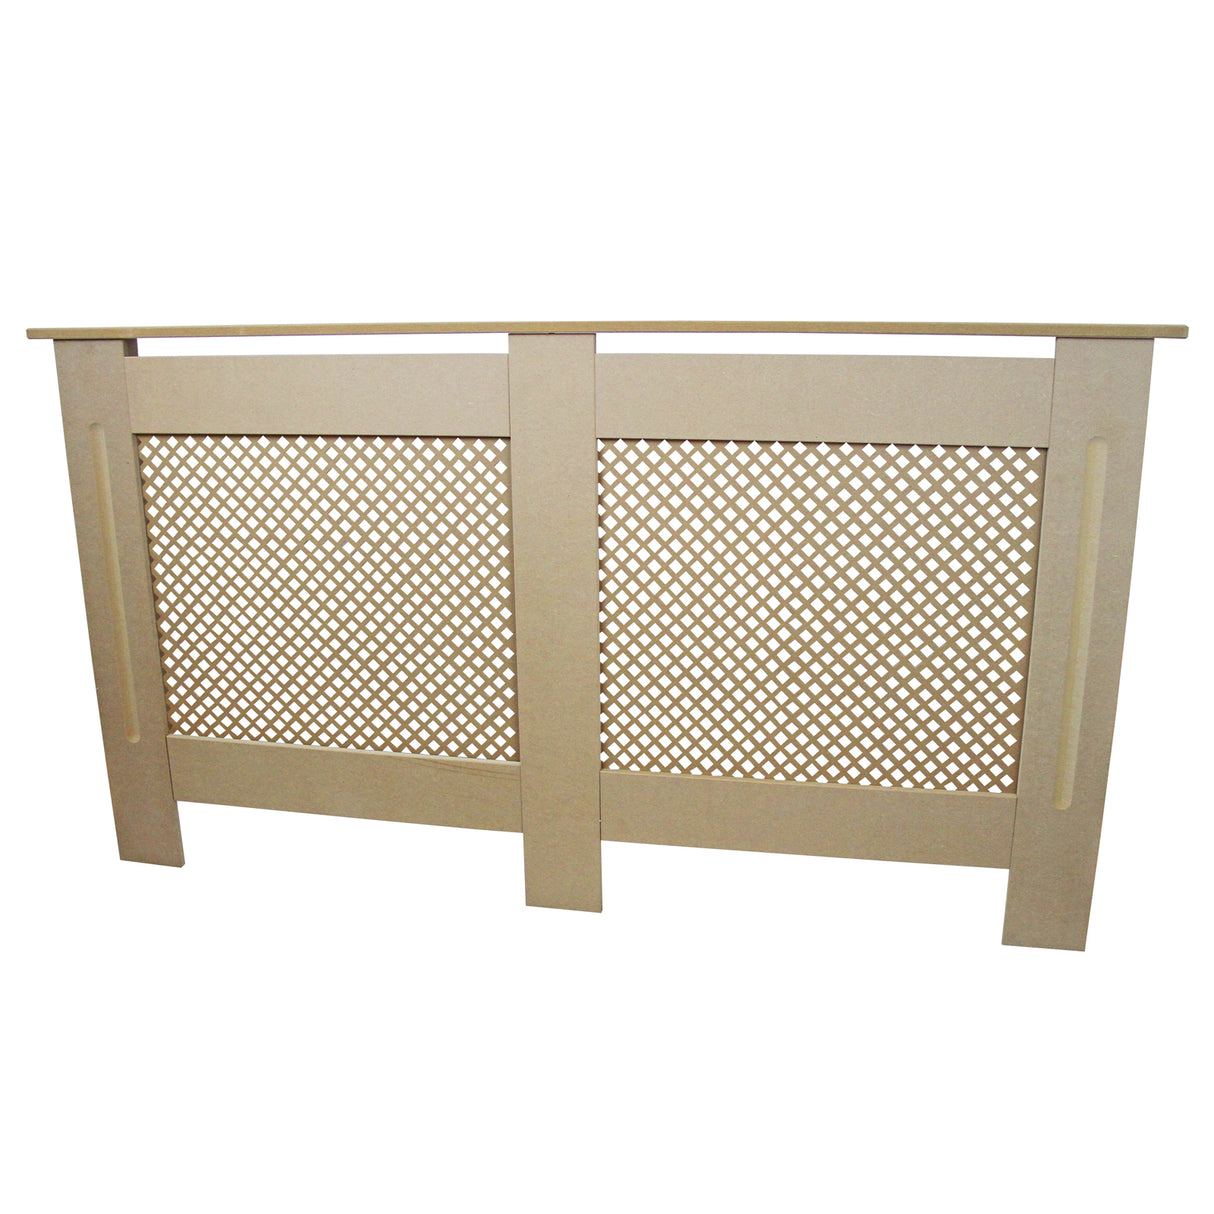 Radiator Cover MDF Unfinished 1515mm